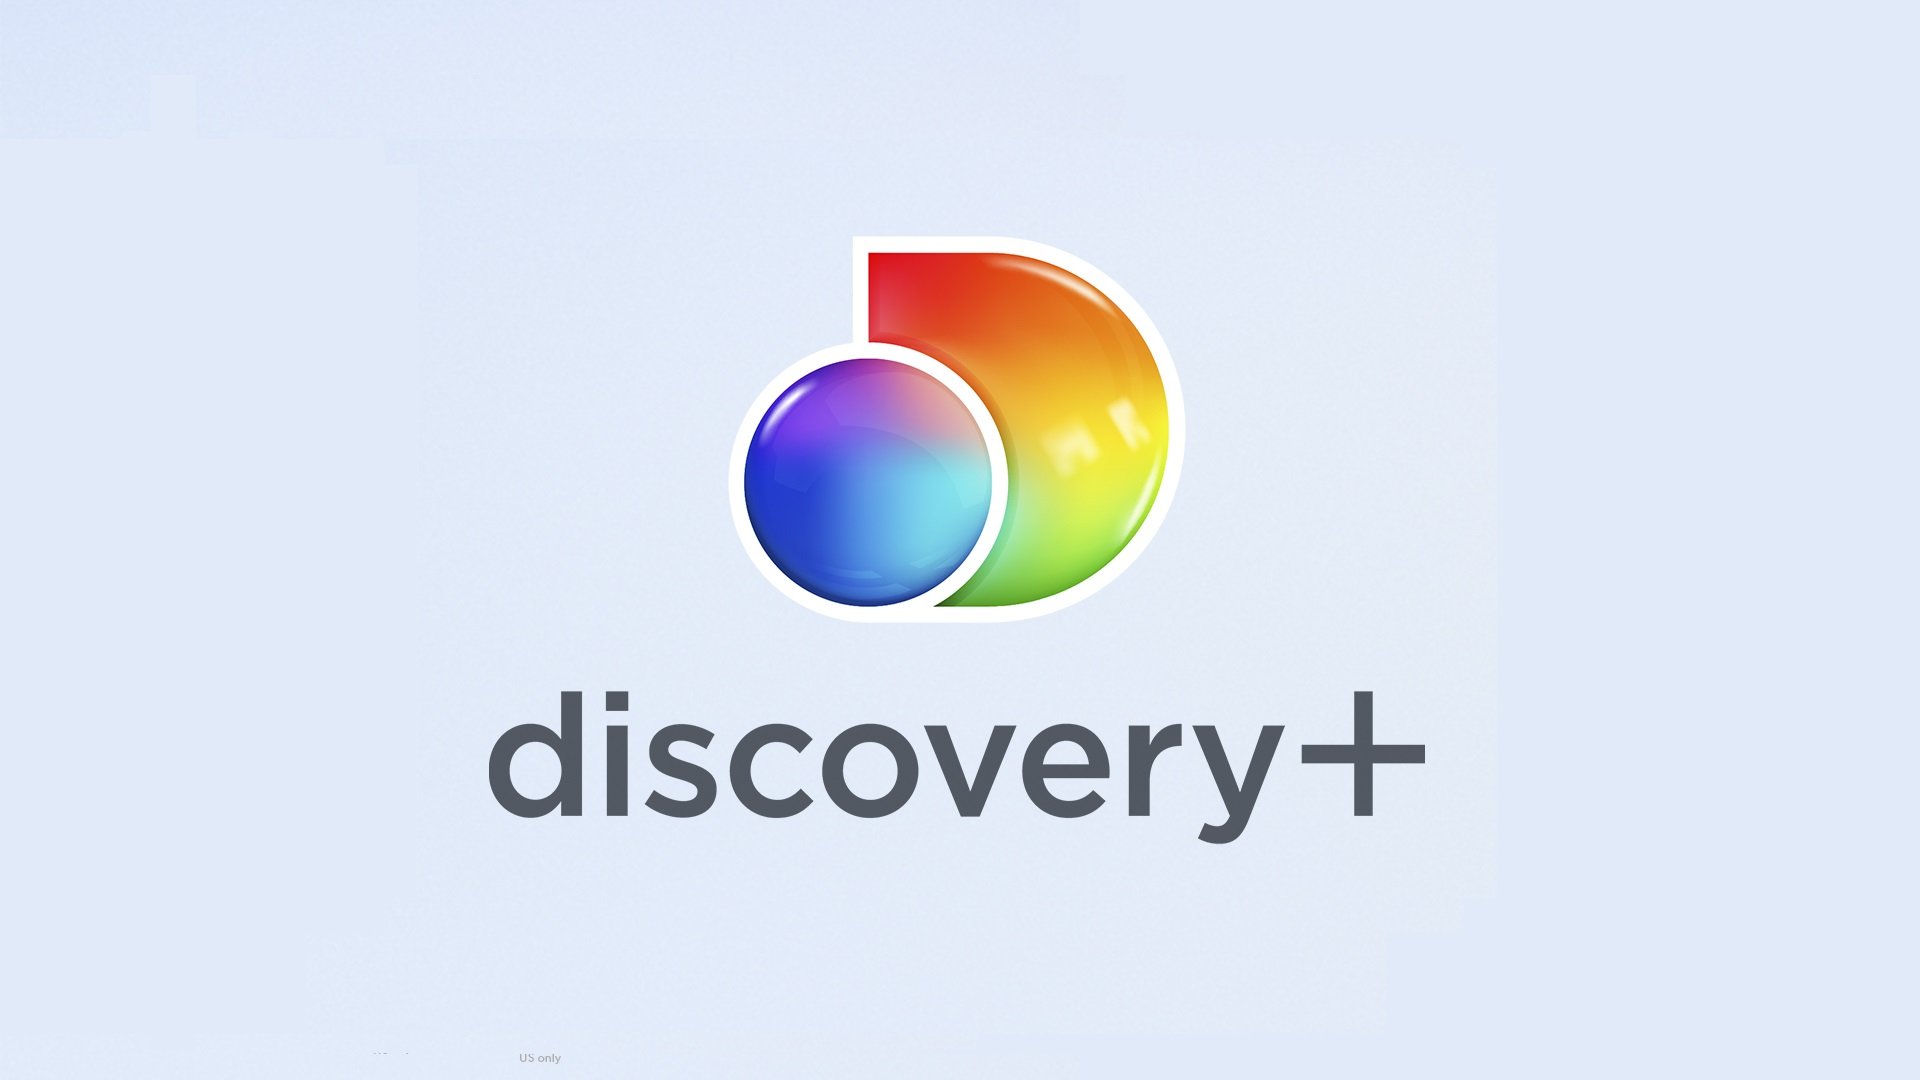 How To Activate Discovery Plus On Lg Smart TV